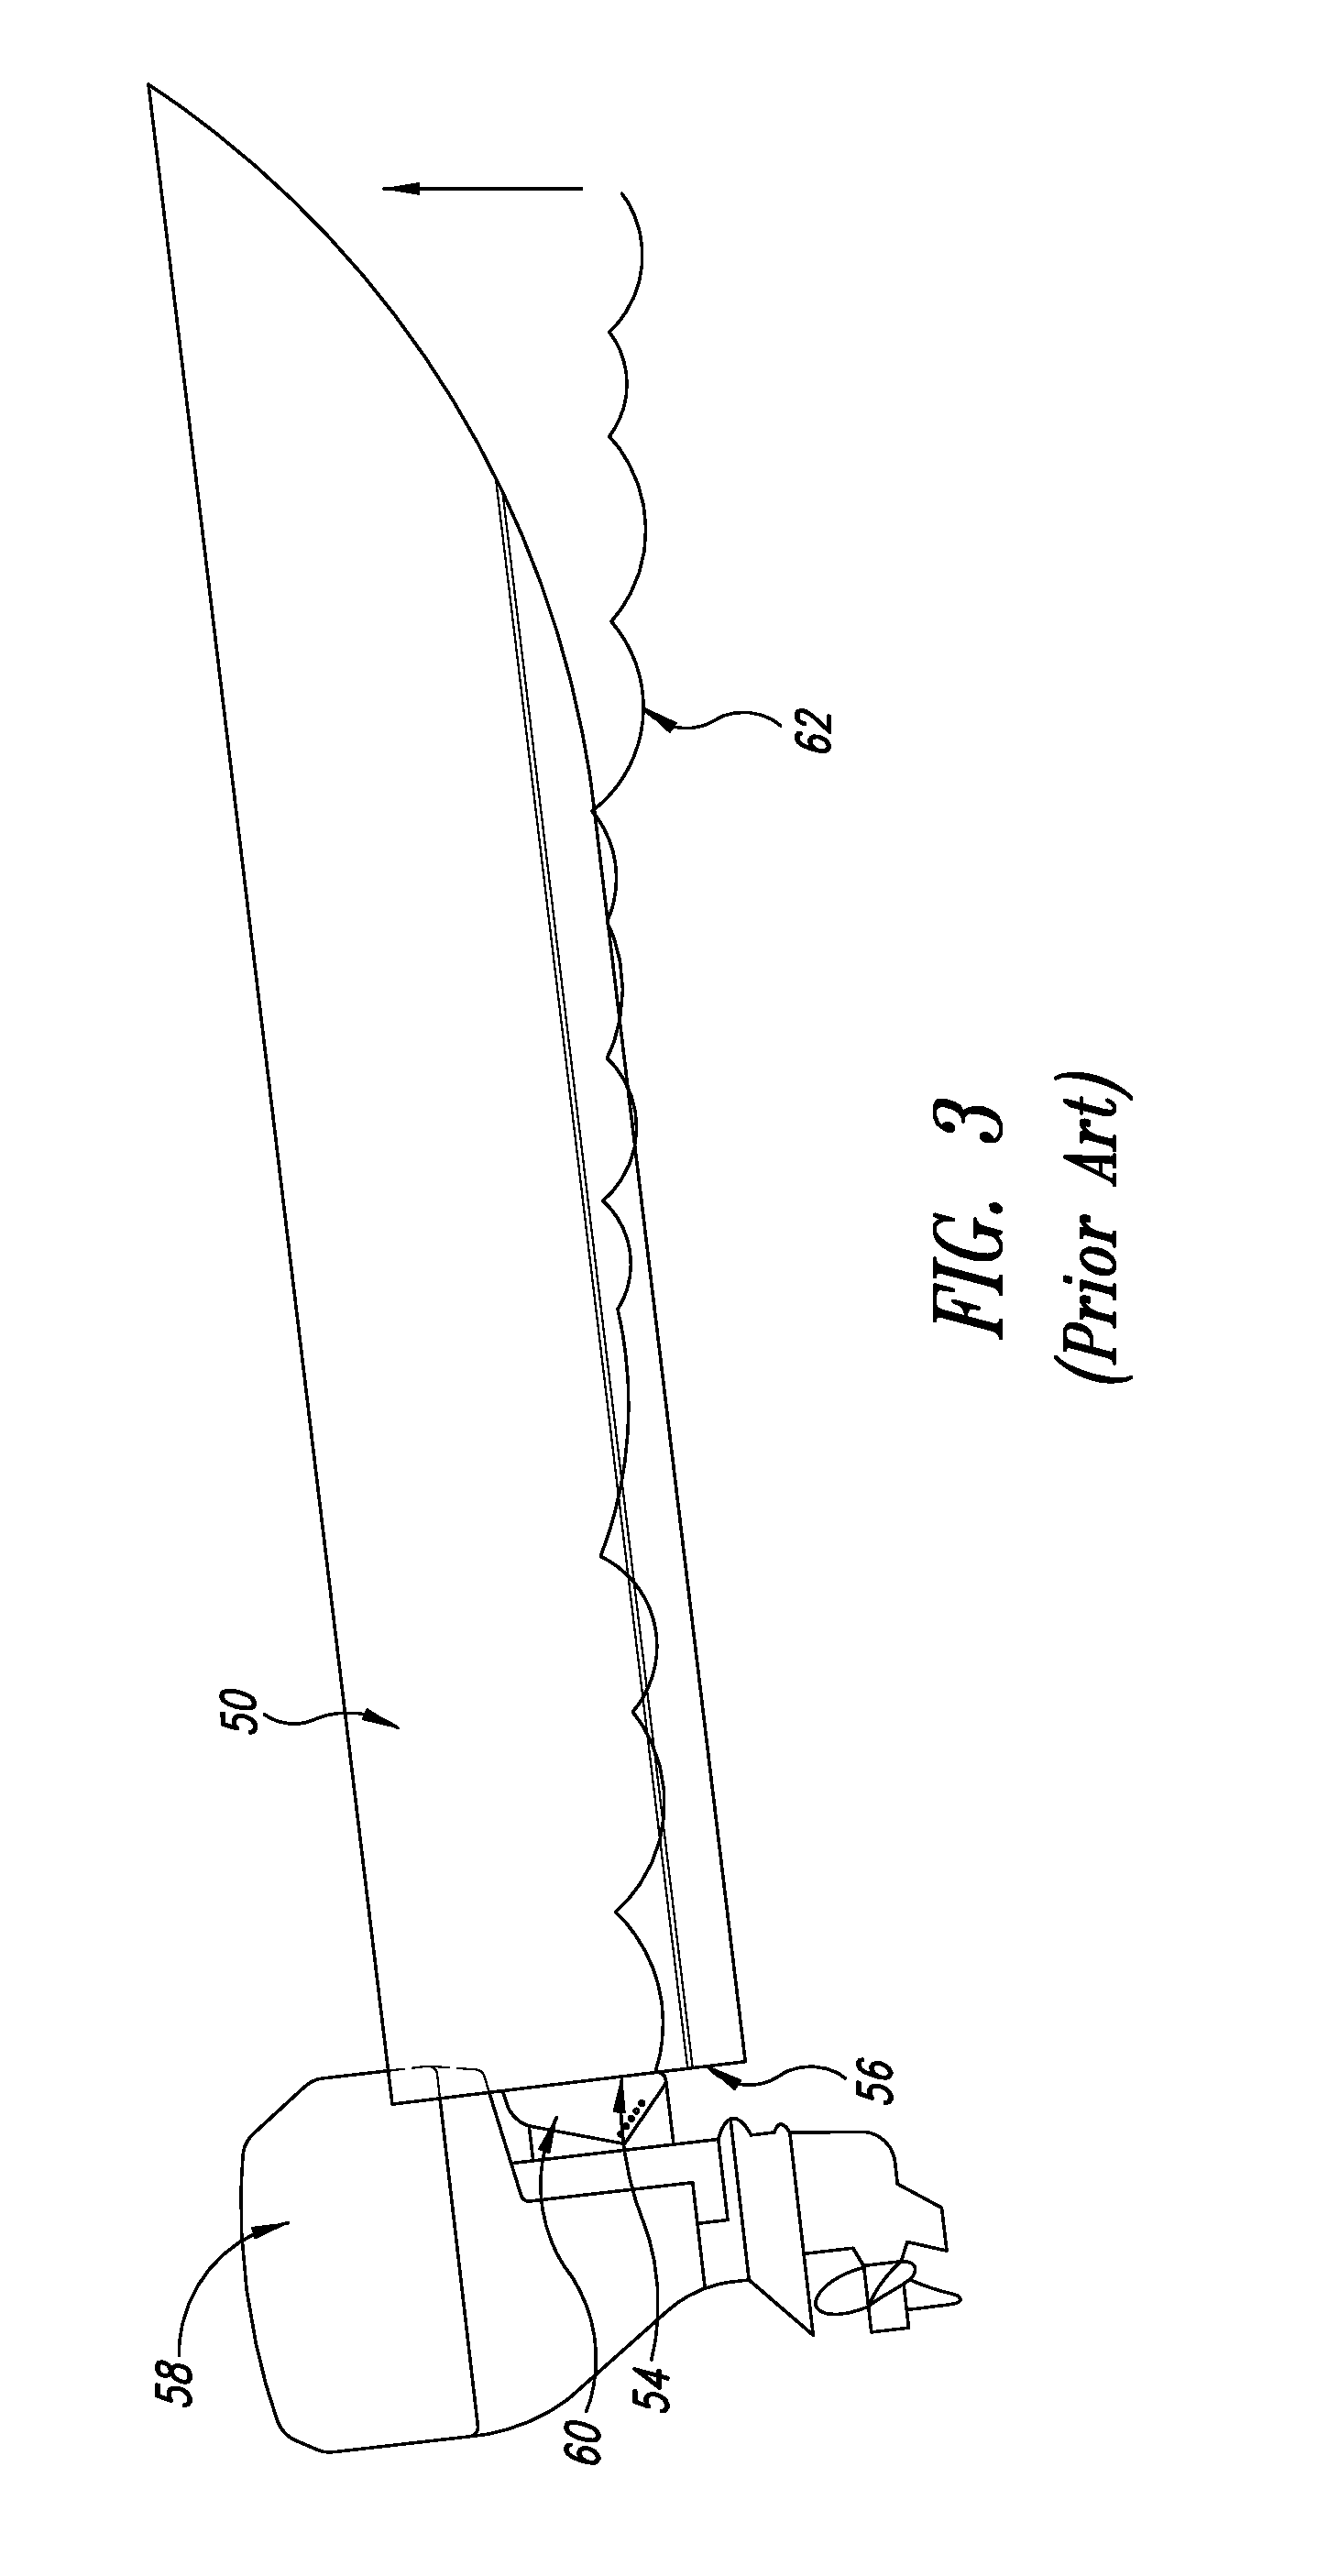 System and apparatus for outboard watercraft trim control